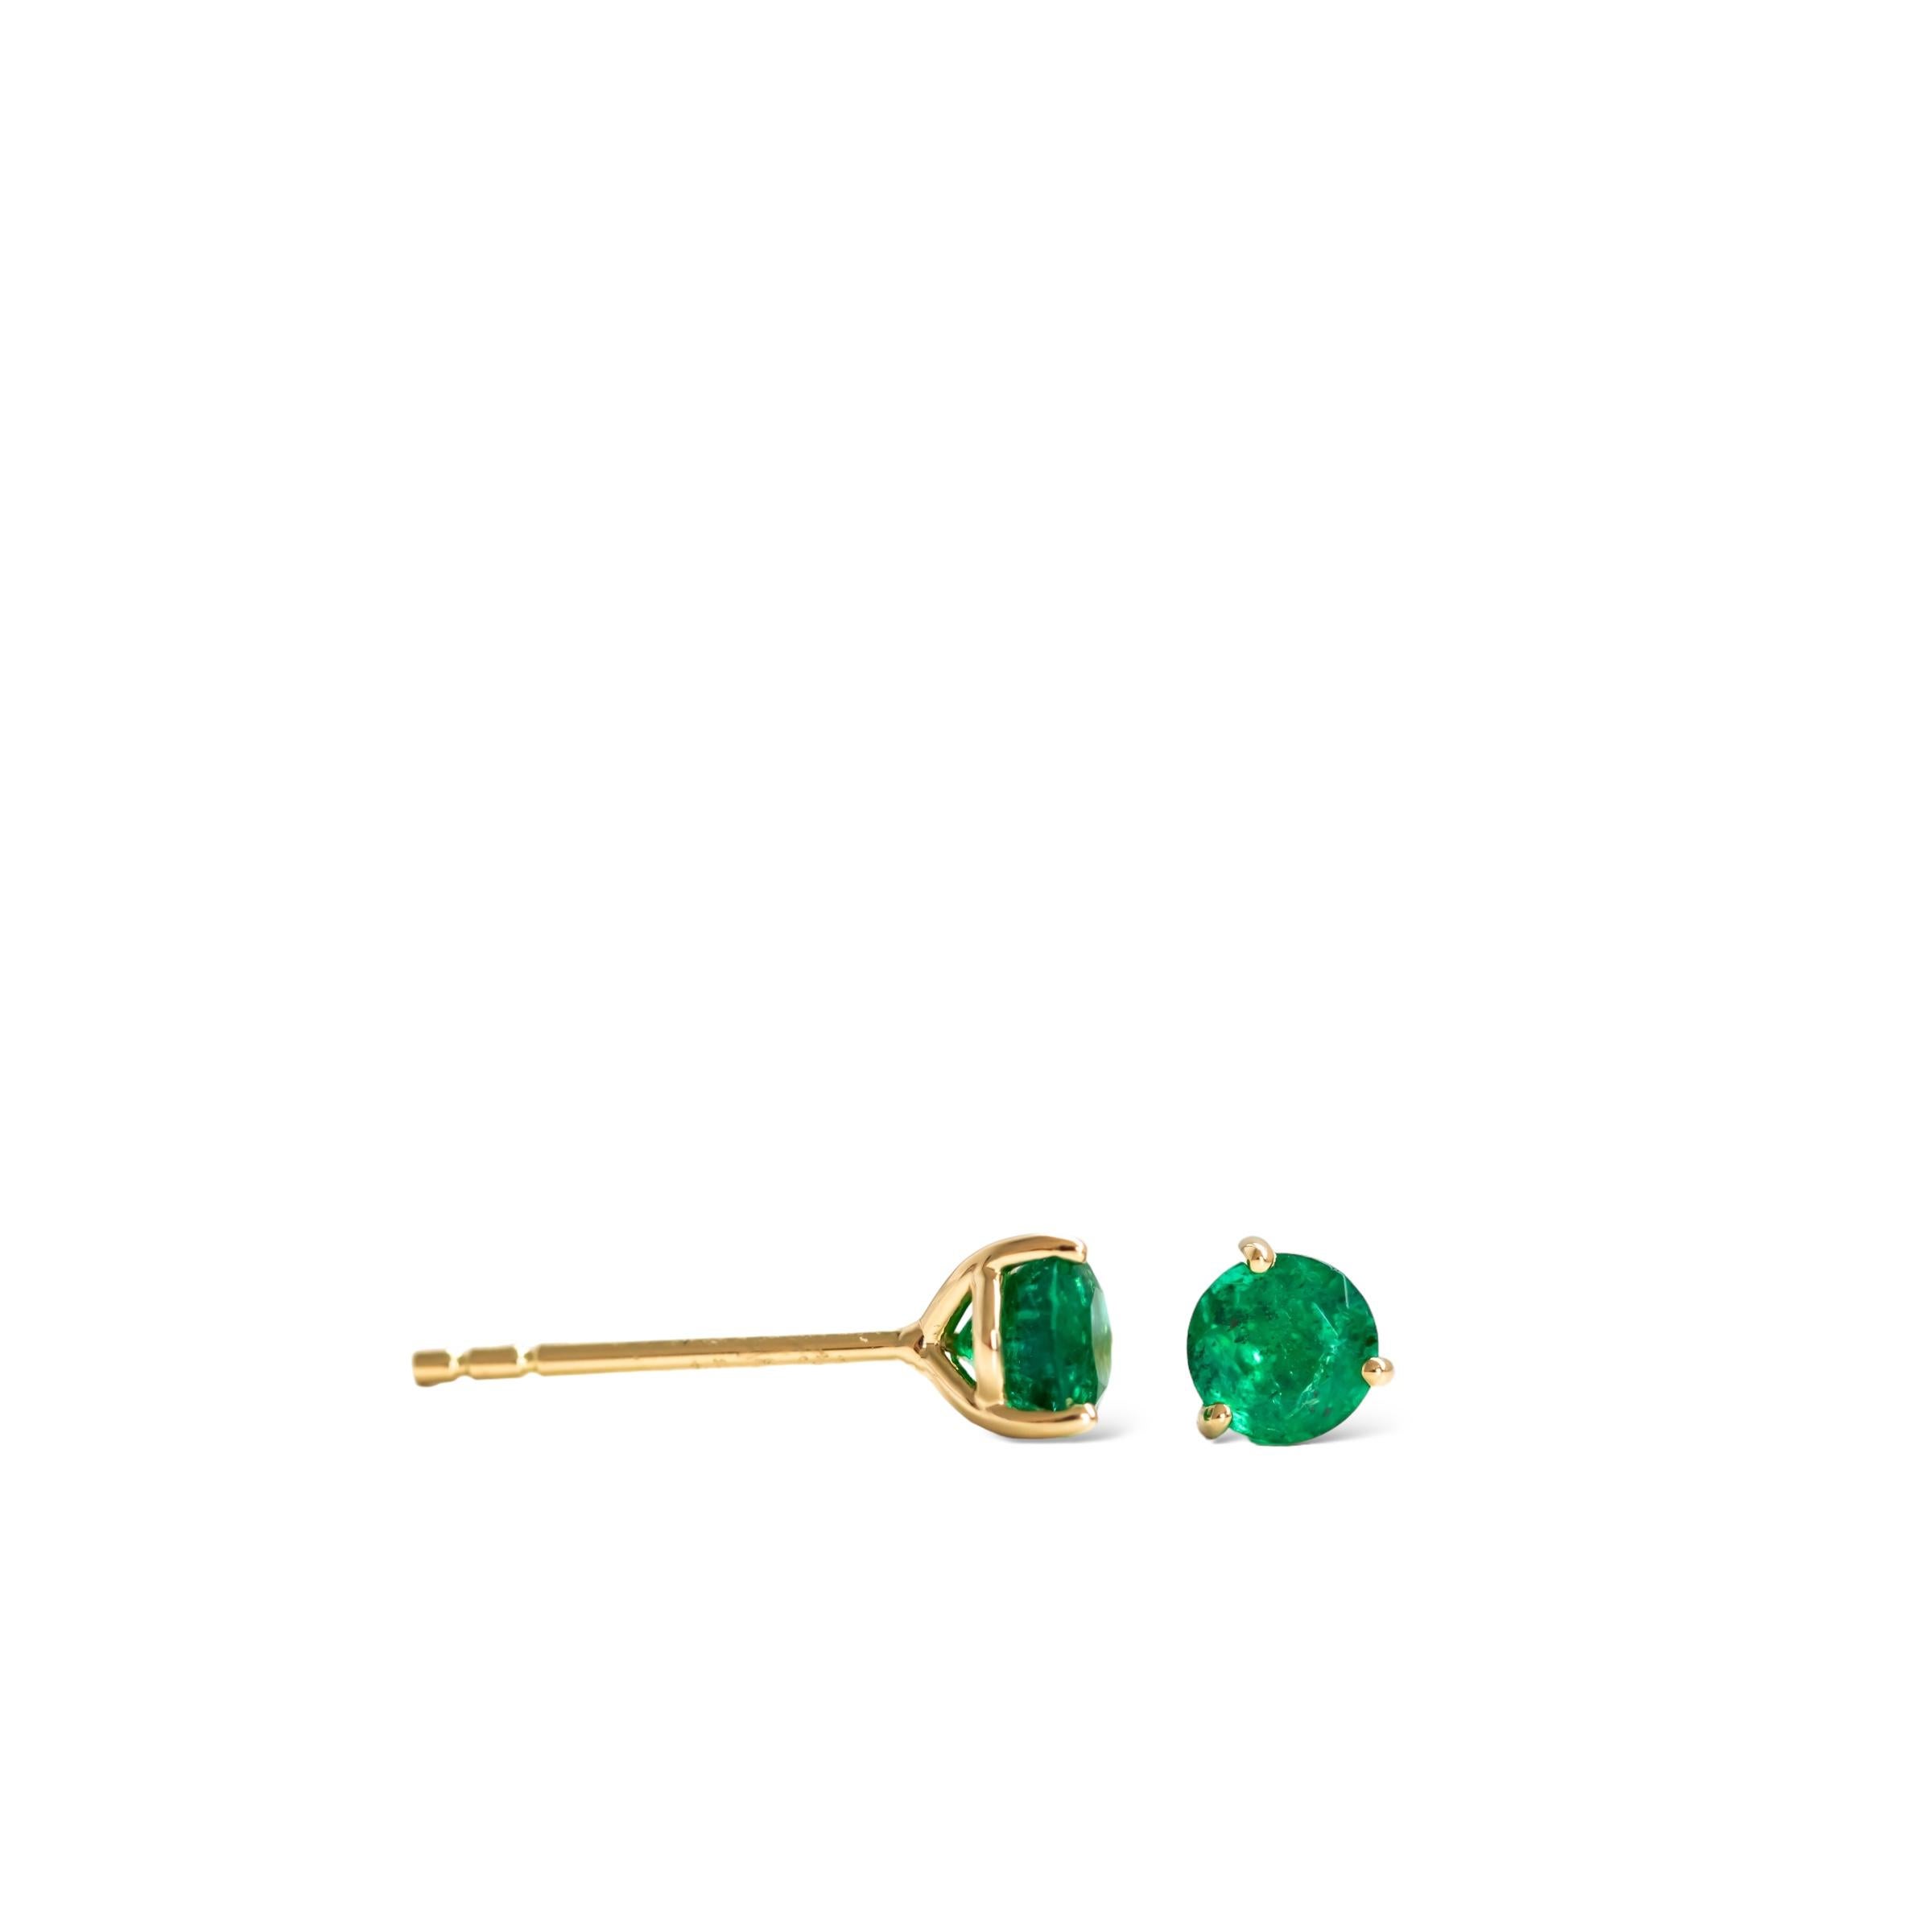 Round Cut Round Green Emerald Stud Earrings in 18k Yellow Gold For Sale